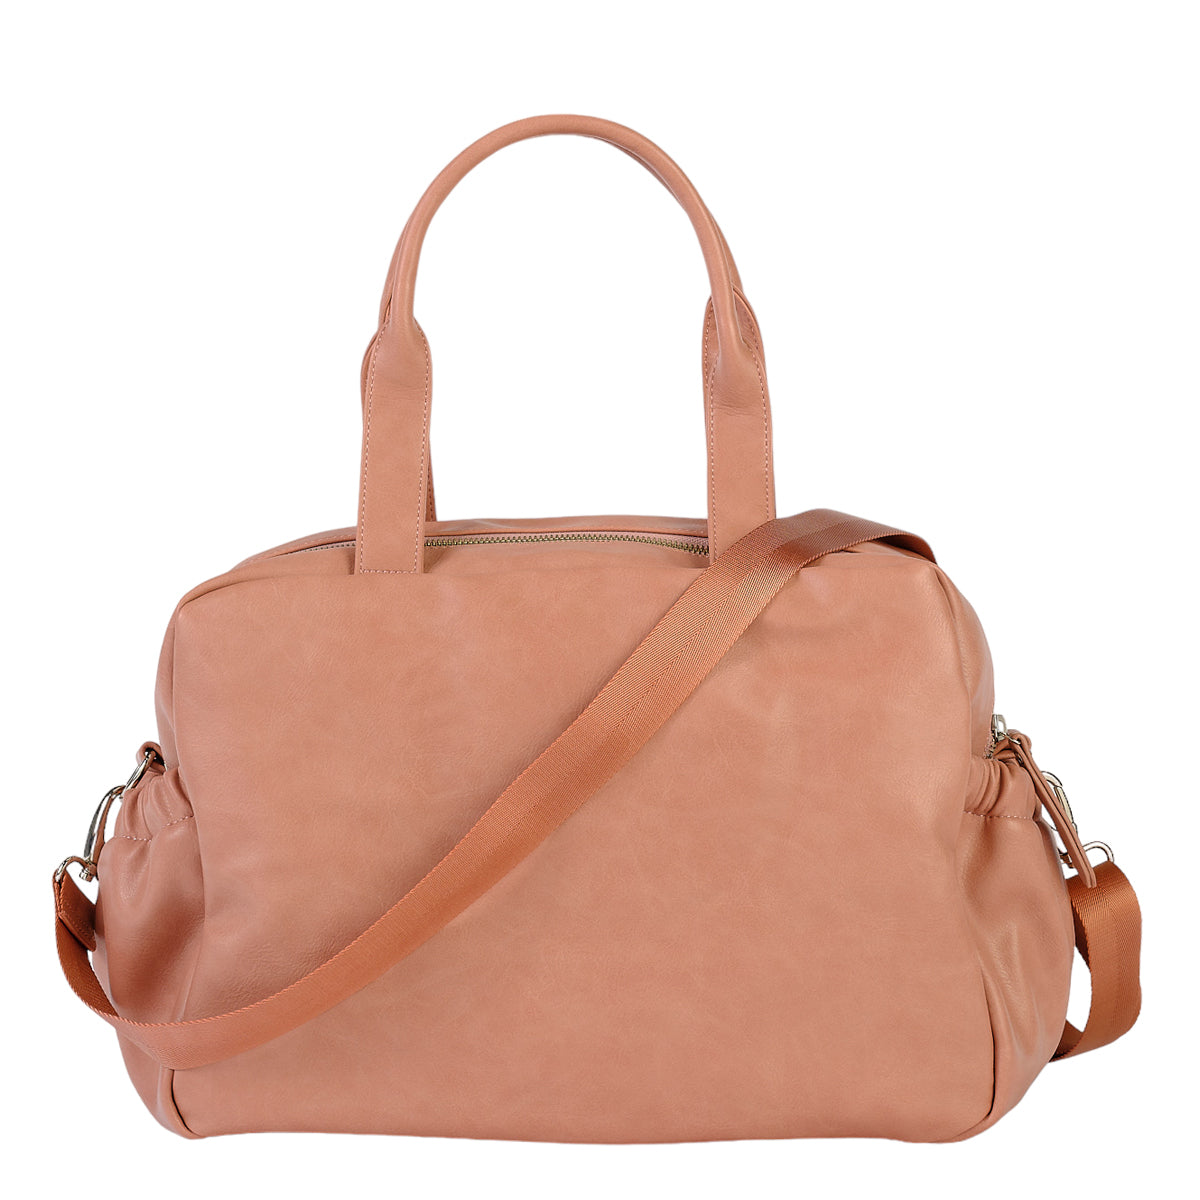 OiOi Faux Leather Carry All Nappy Bag - Dusty Rose 5.jpg